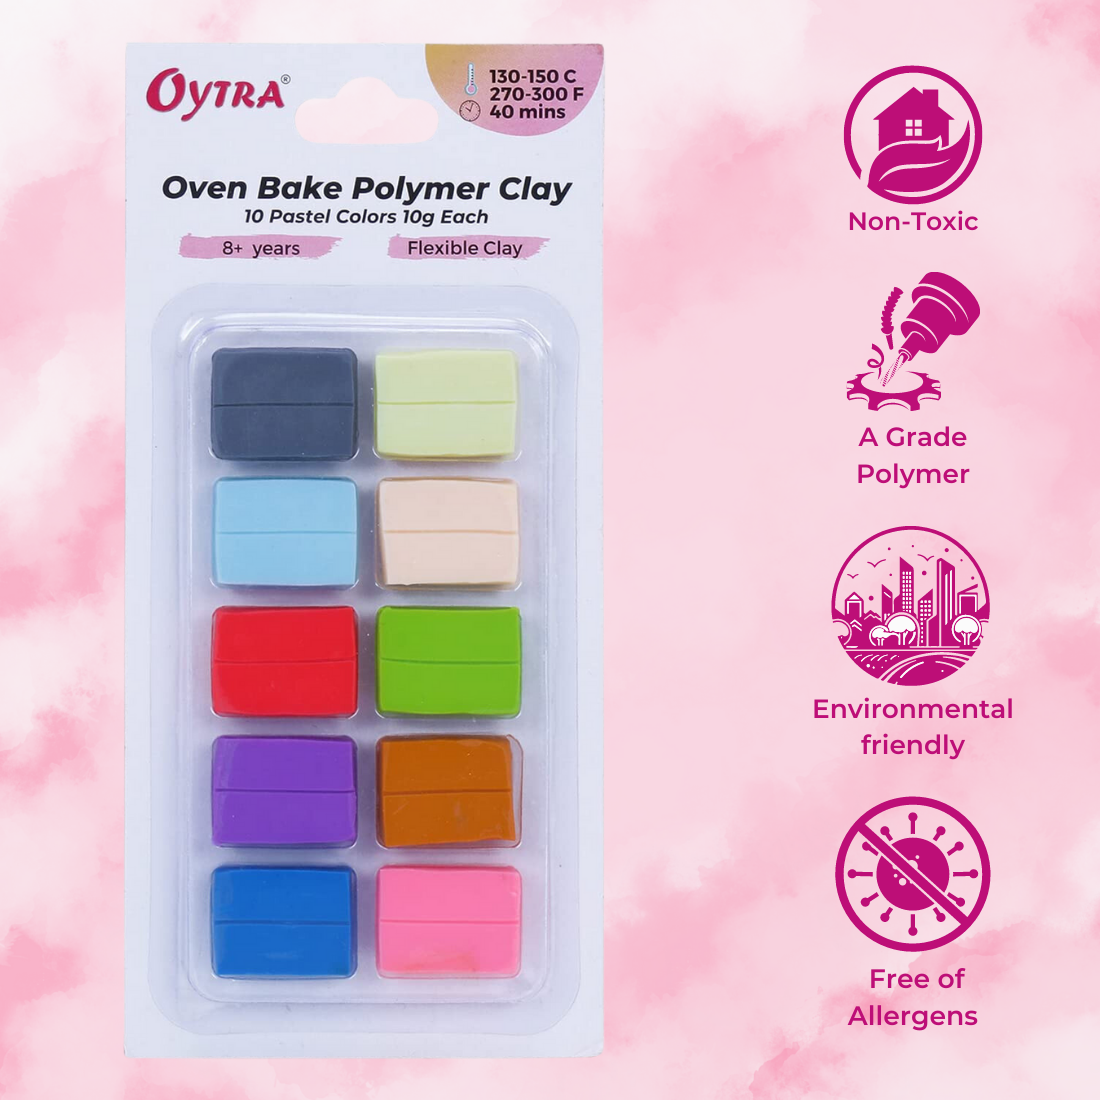 10 Color Polymer Oven Bake Clay Pastel Colors - Oytra